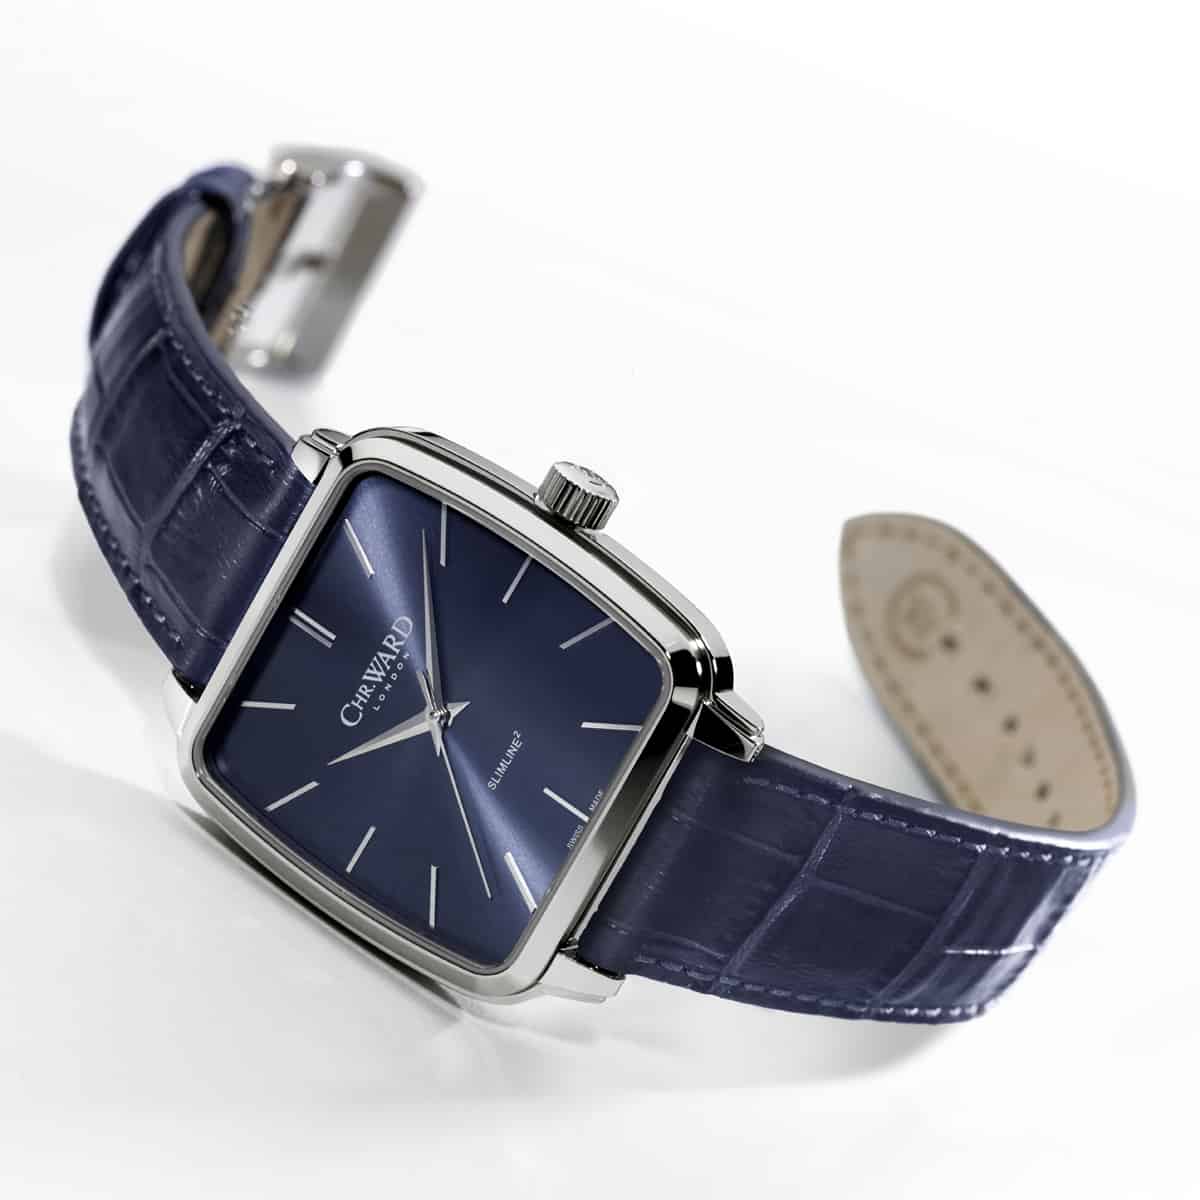 Introducing the Christopher Ward C5 Slimline Square - Worn & Wound